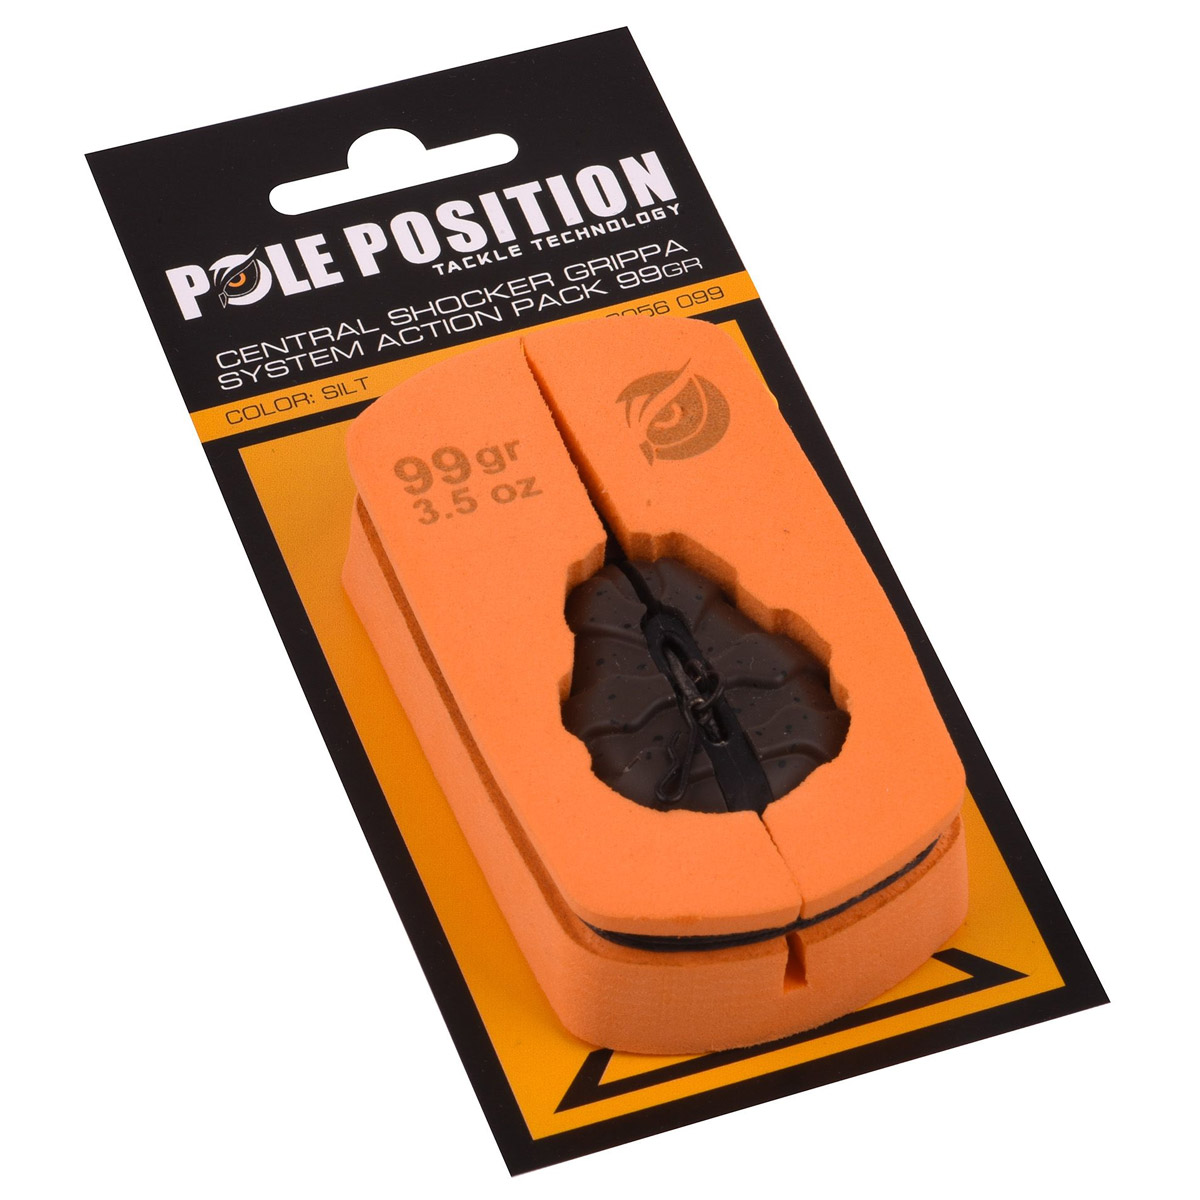 Pole Position Central Shocker System Grippa Action Pack Weed